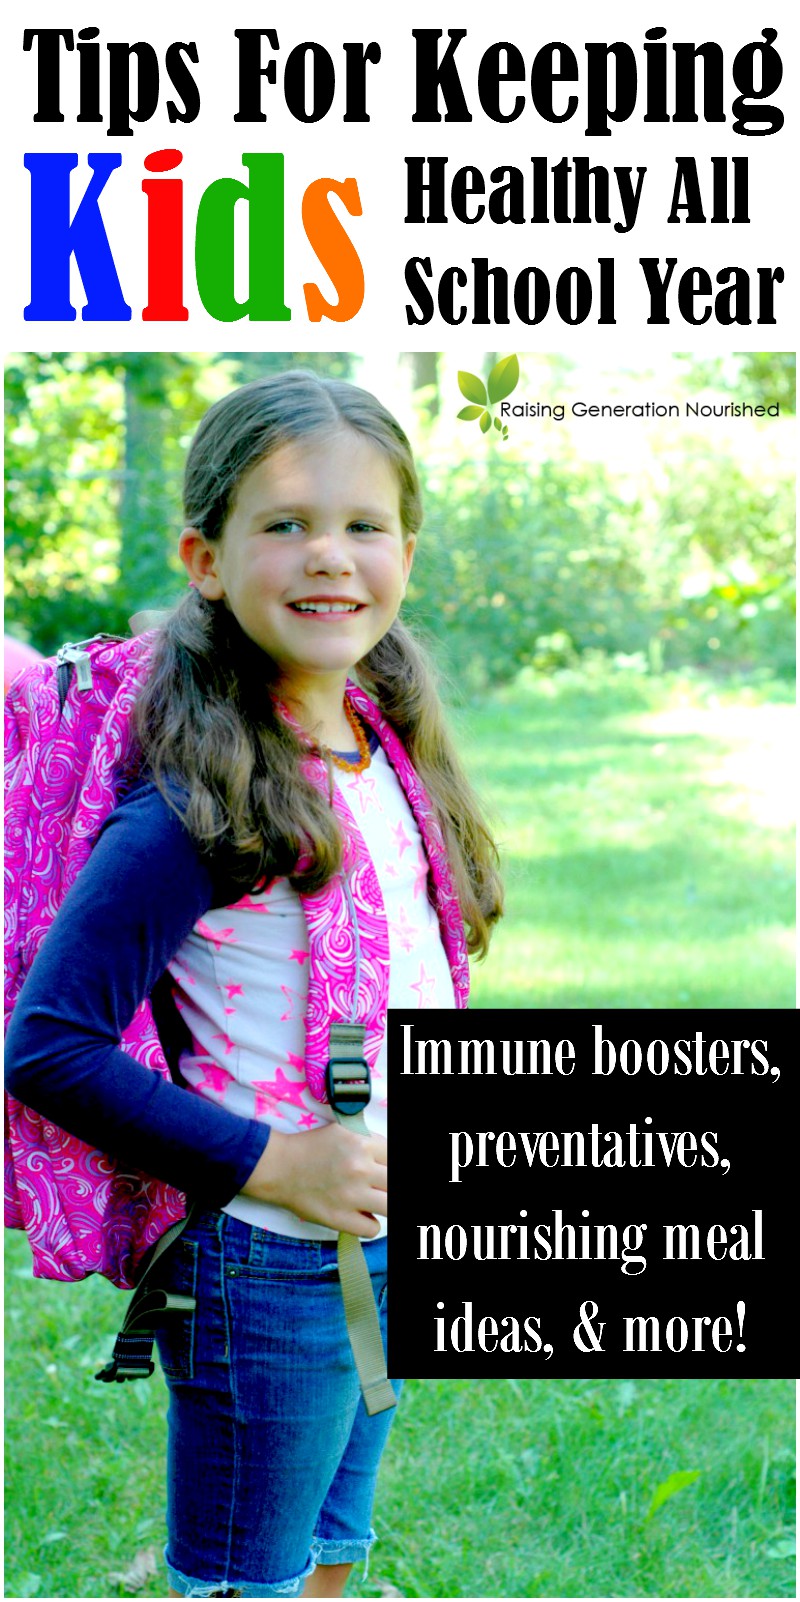 Tips For Keeping Kids Healthy All School Year